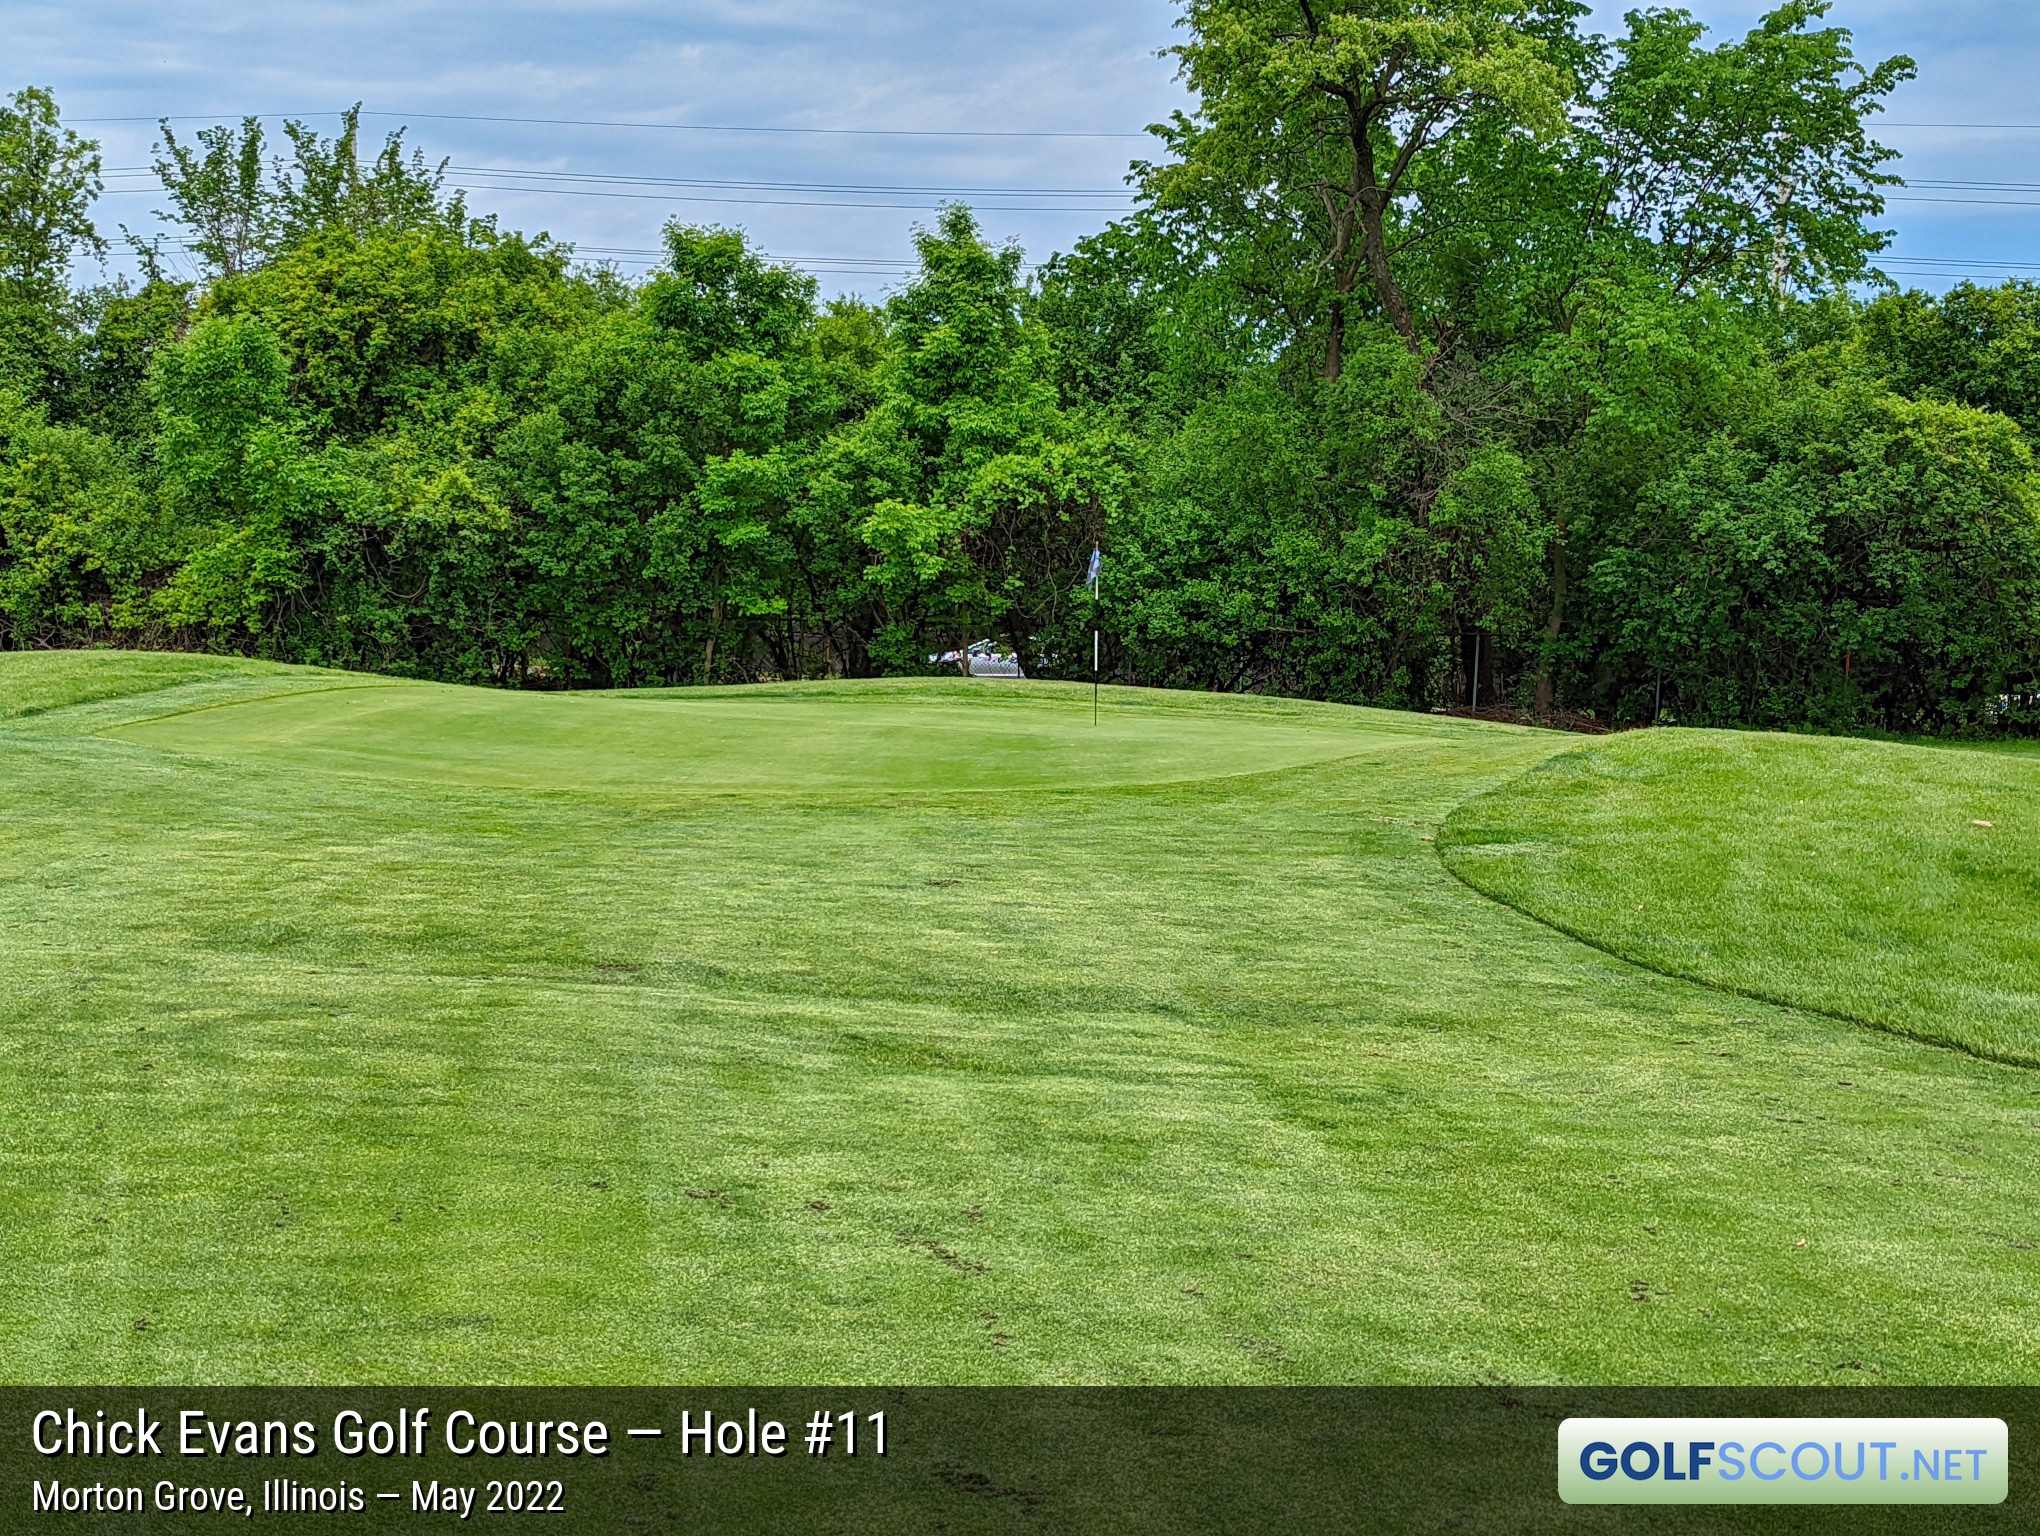 Photo of hole #11 at Chick Evans Golf Course in Morton Grove, Illinois. 